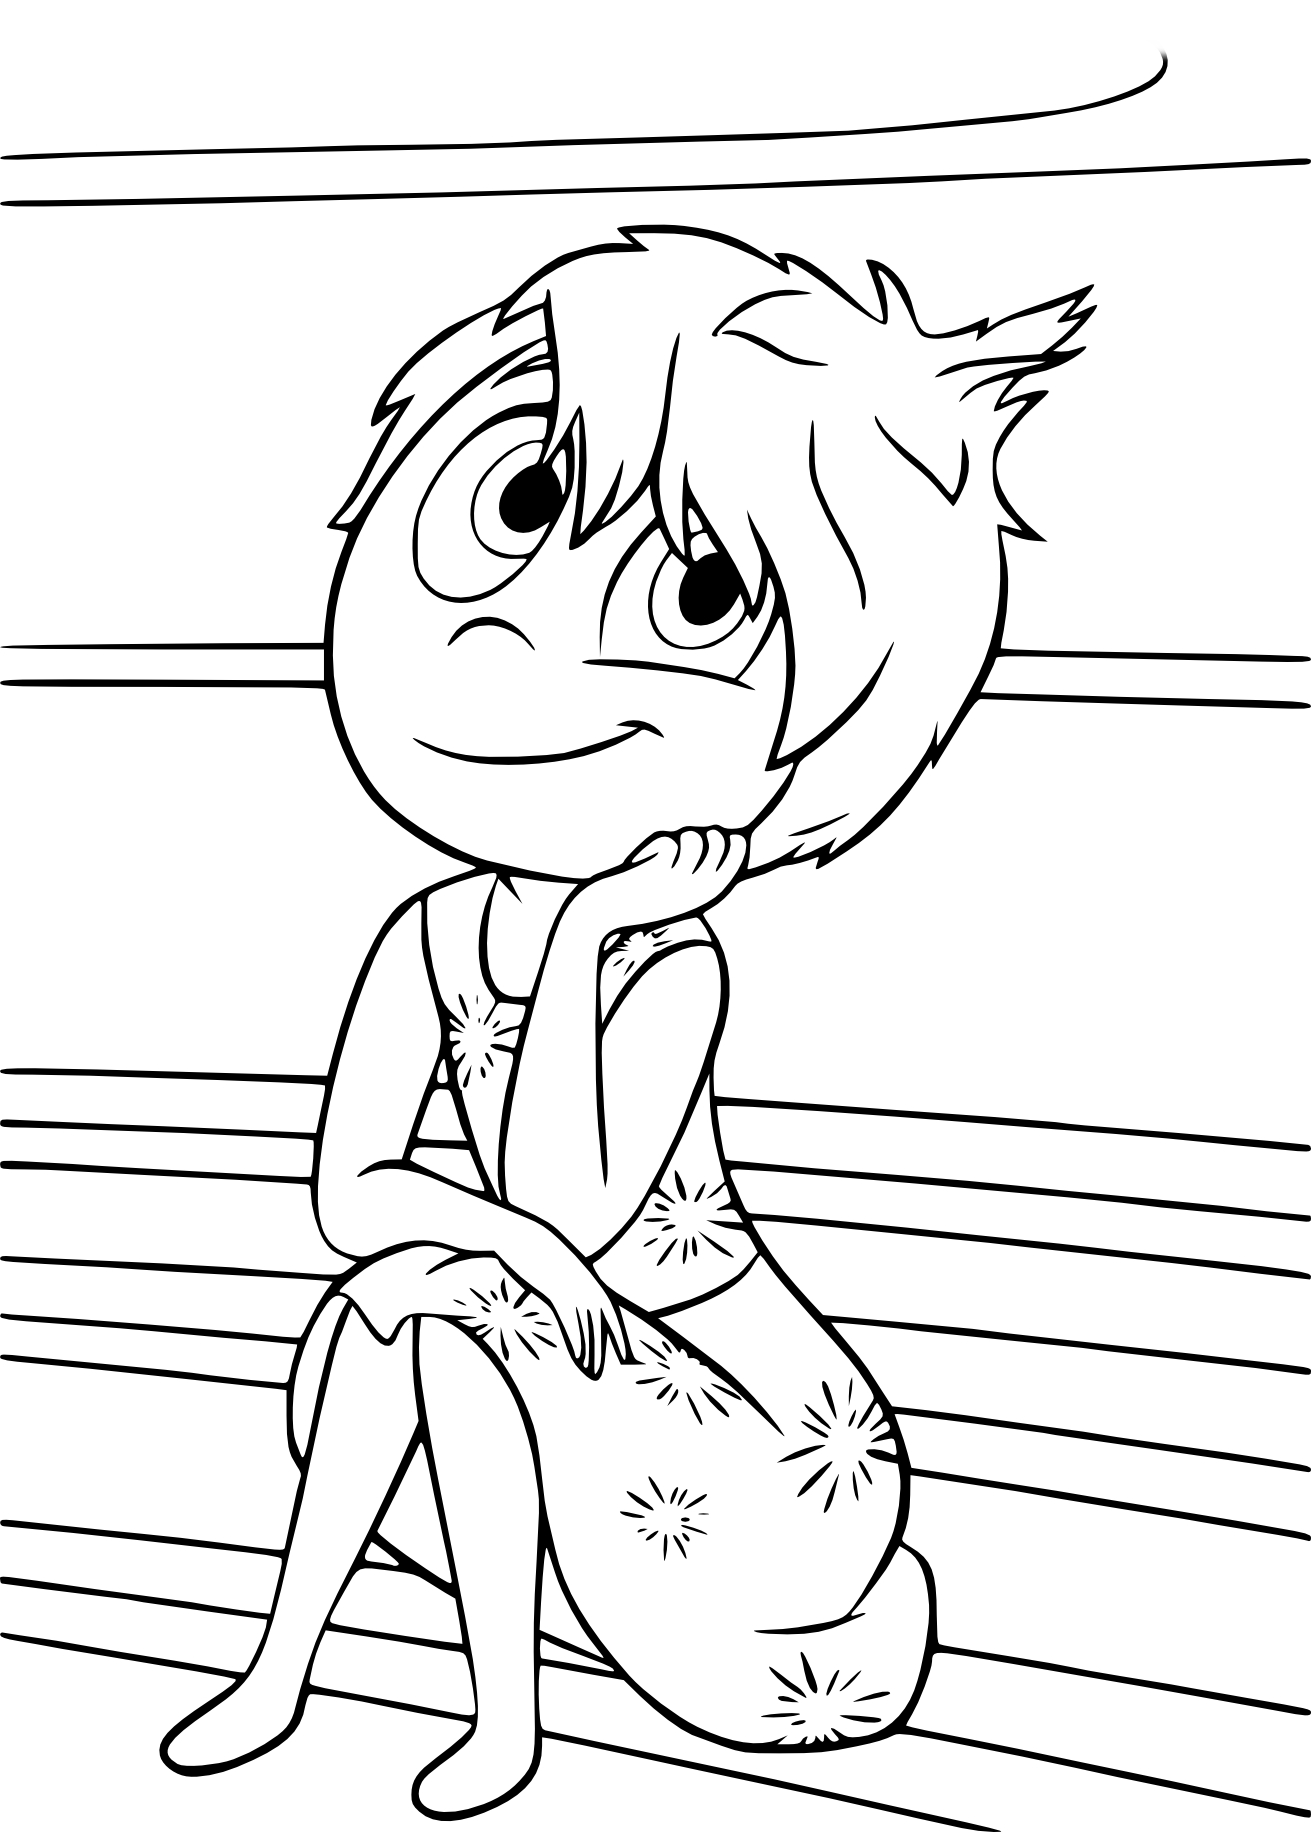 Vice Versa Riley drawing and coloring page